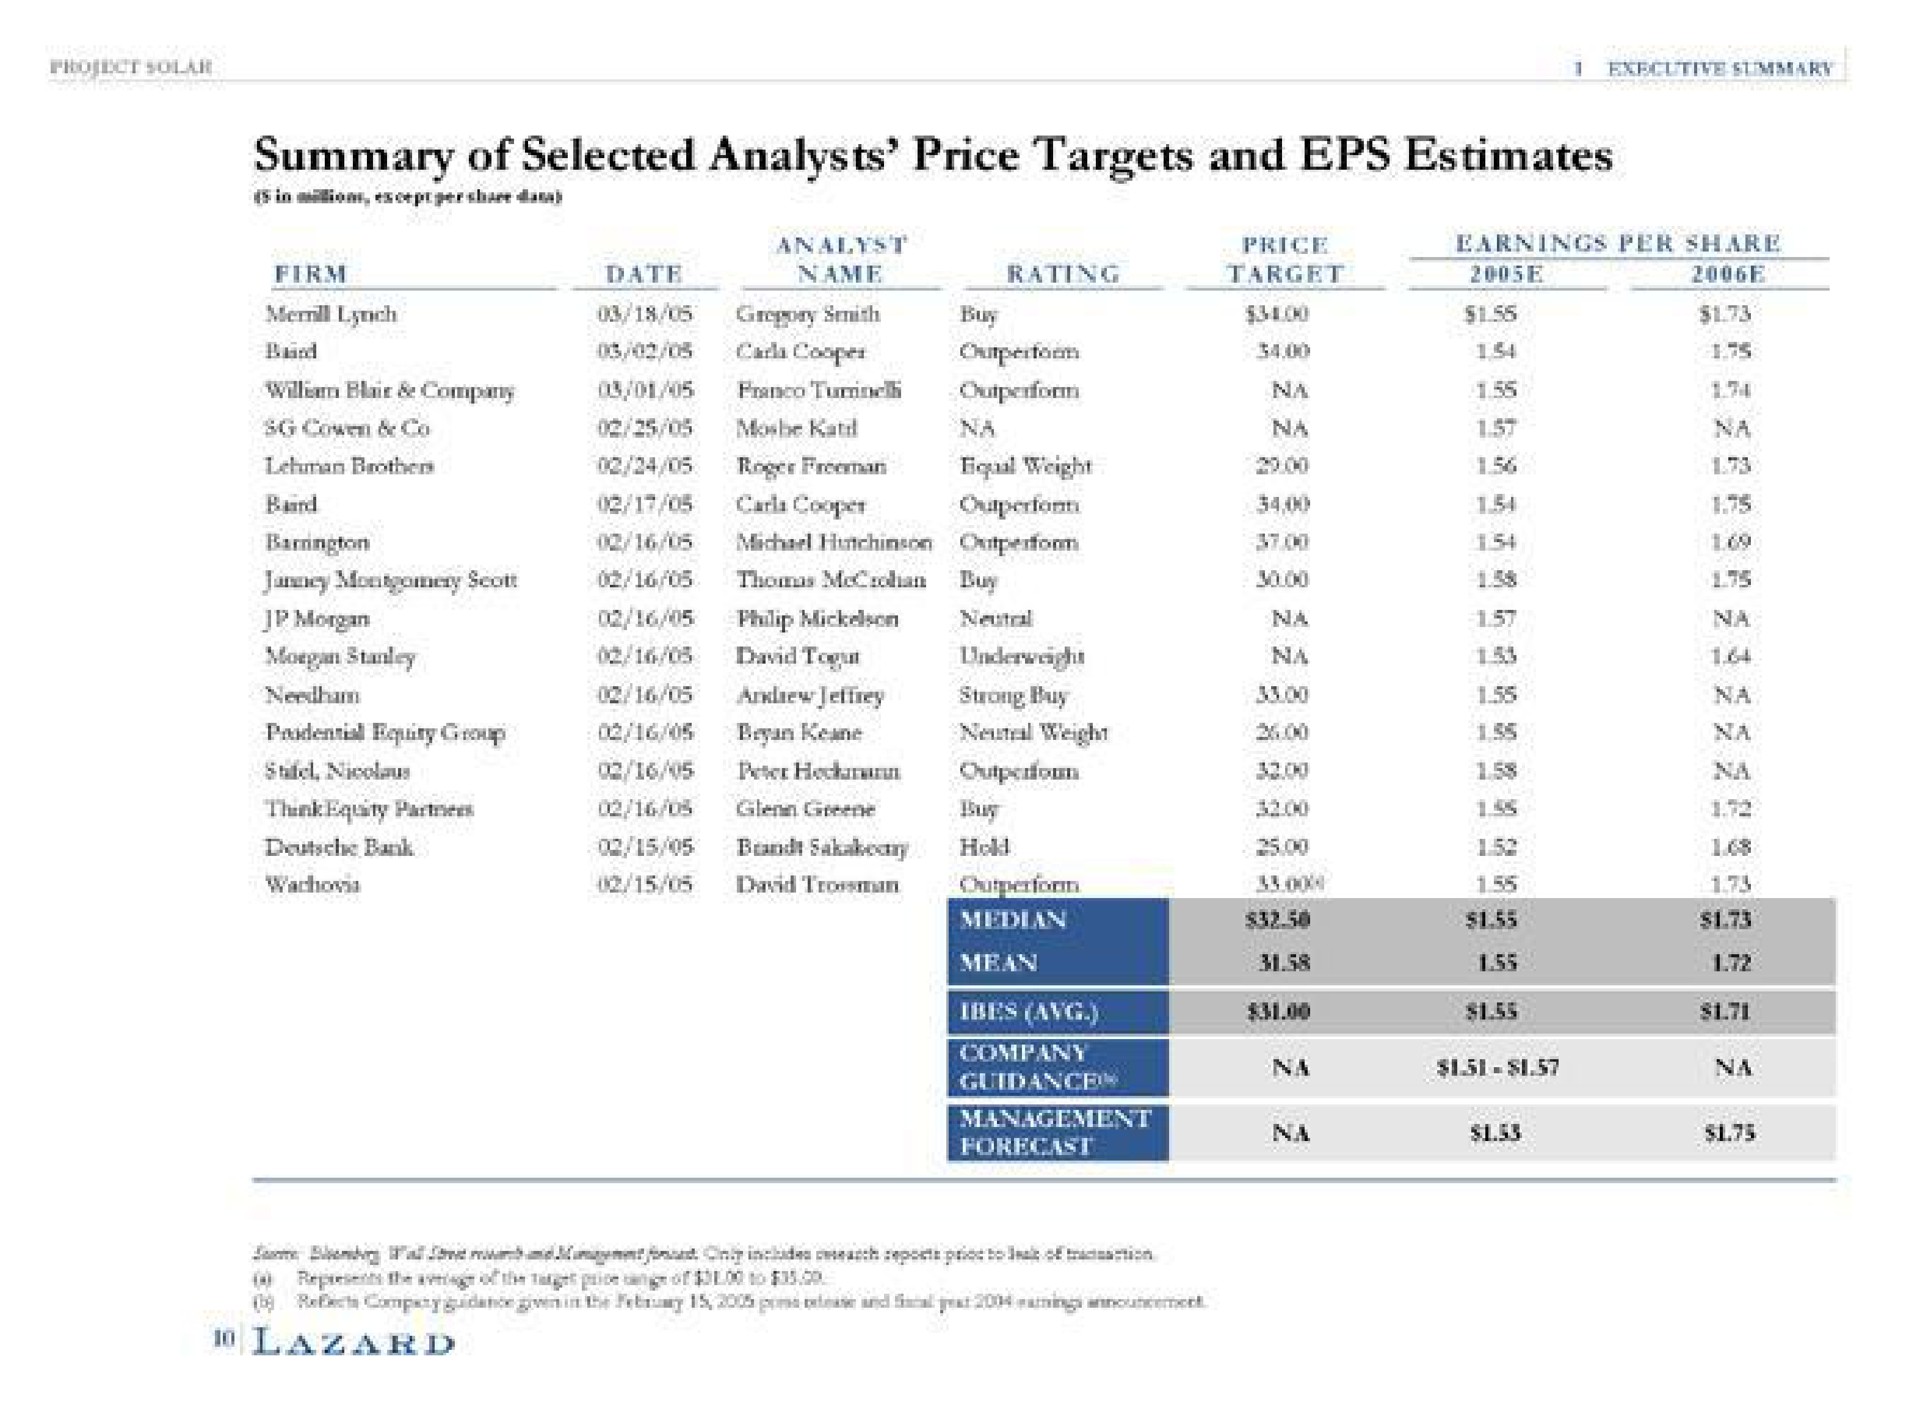 summary of selected analysts price targets and estimates lynch blair company smith outperform i | Lazard